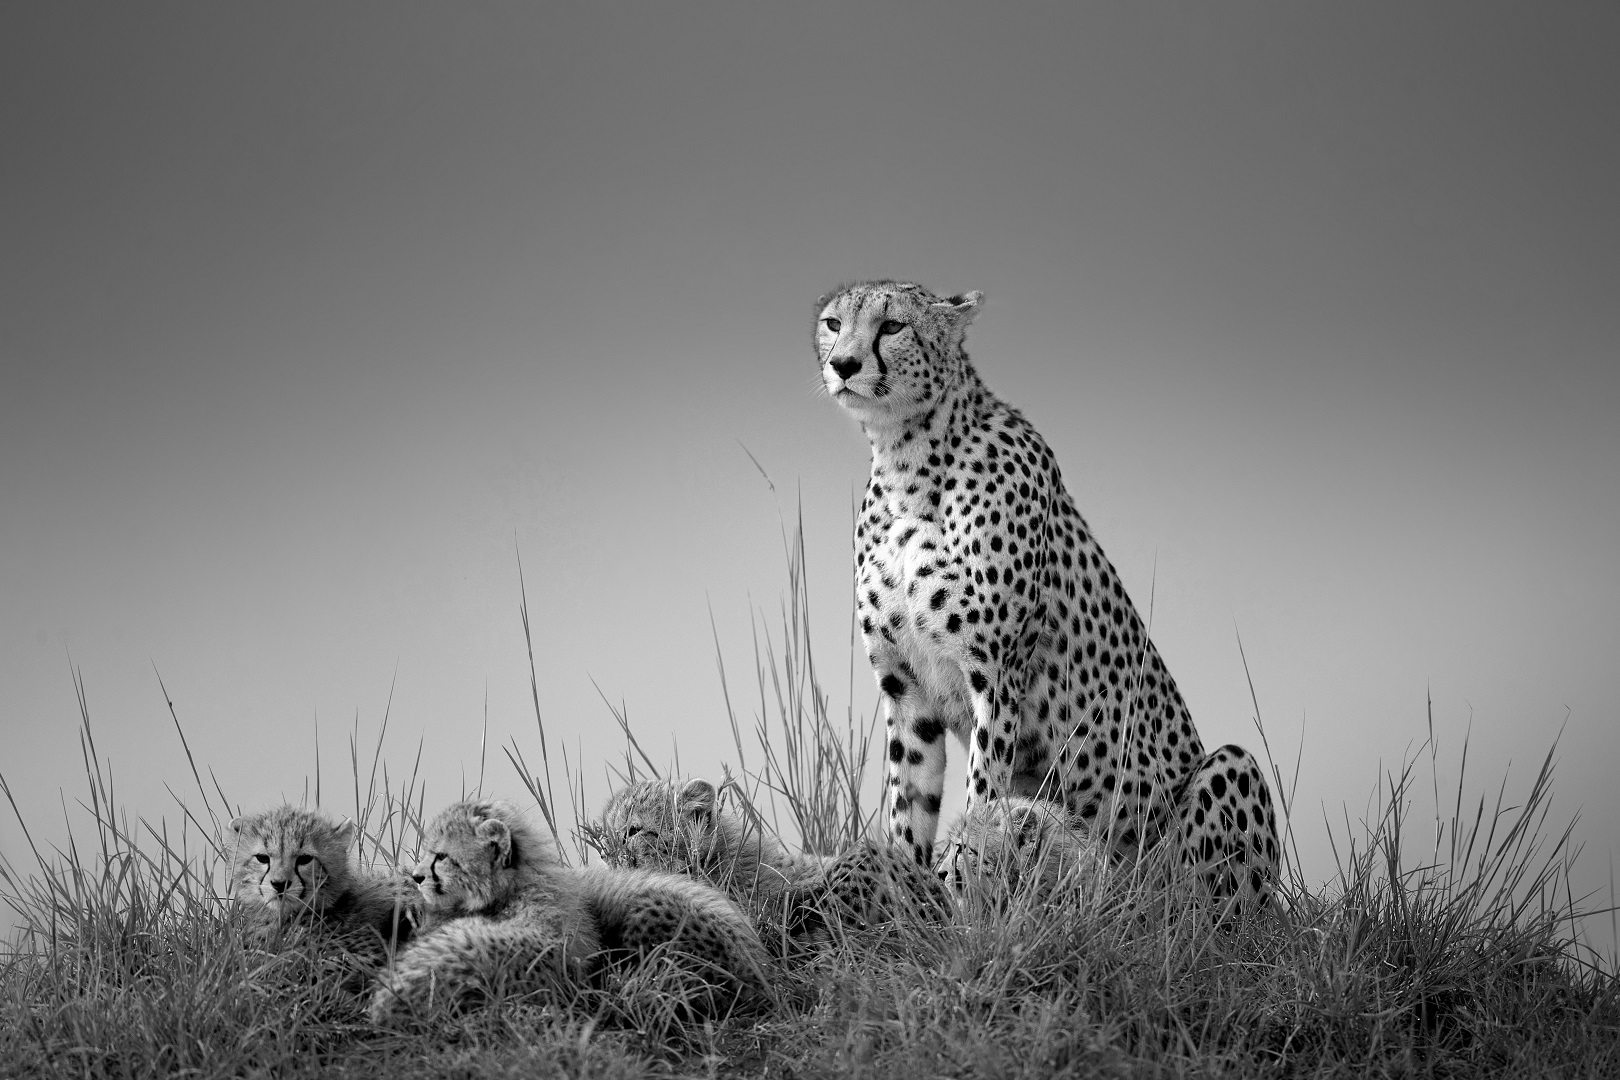 Absolute winner of the Black and Withe Photo Awards 2022 - Johan Willems - Cheetah with cubs